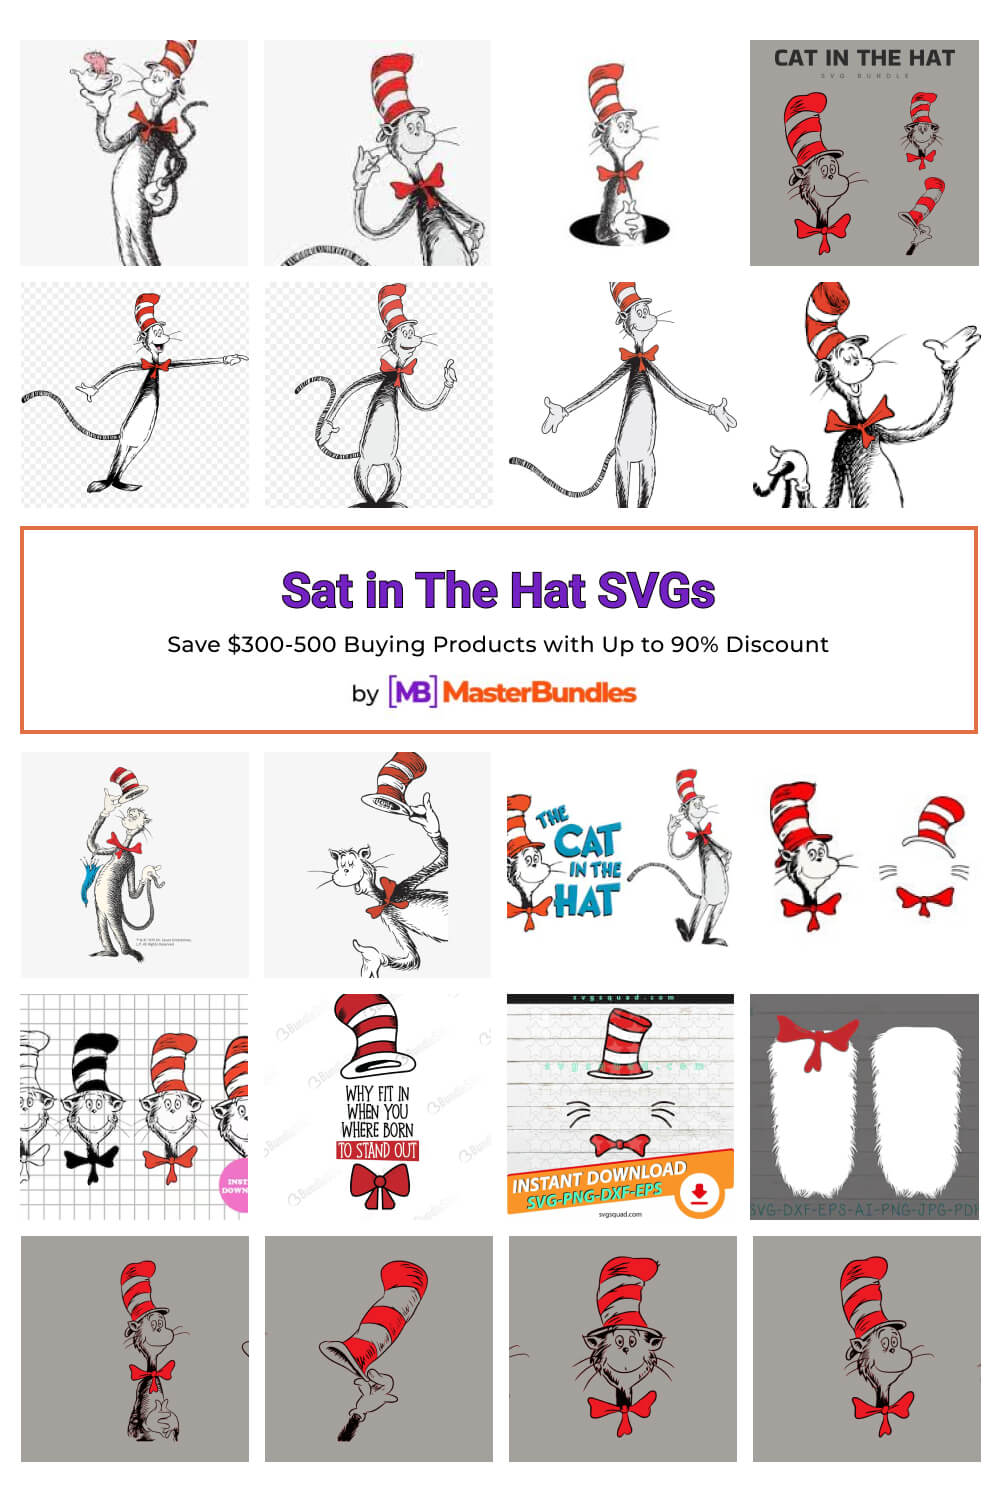 sat in the hat svgs pinterest image.